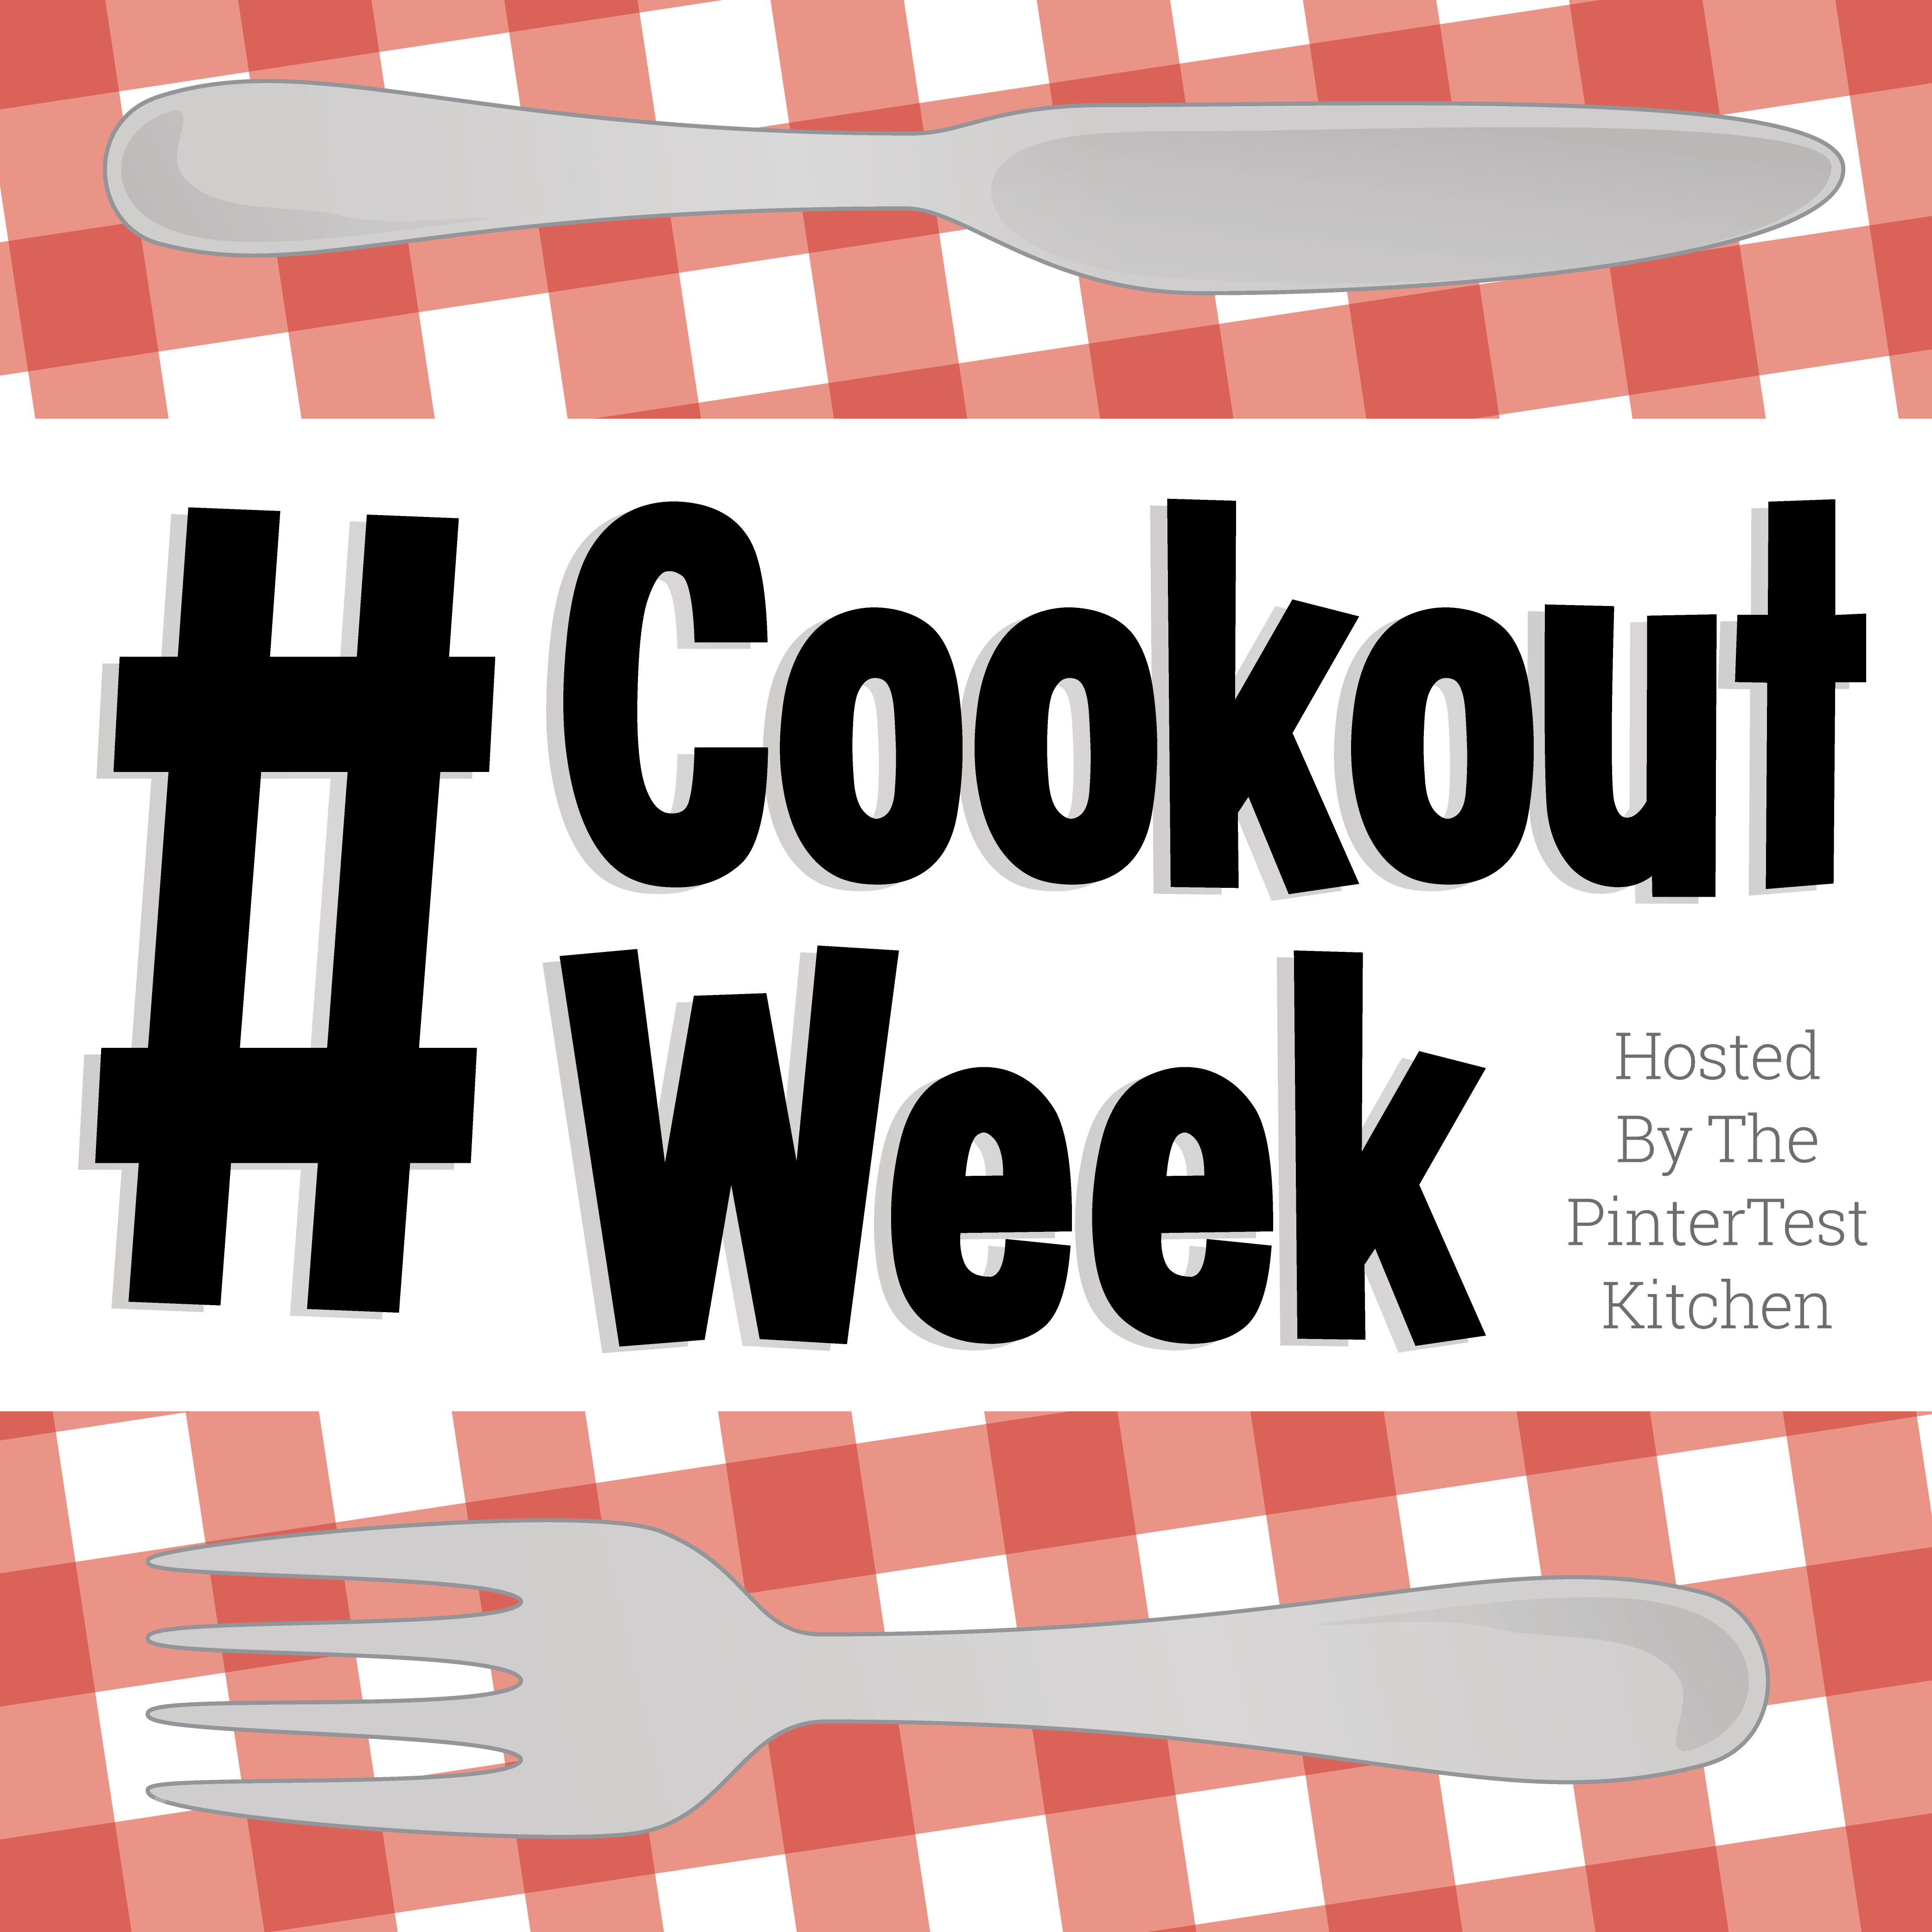 #cookout week, grilling recipes, summer cookout ideas, summer recipes, summer giveaway, july 4th ideas, fourth of july recipes, july 4th bbq ideas